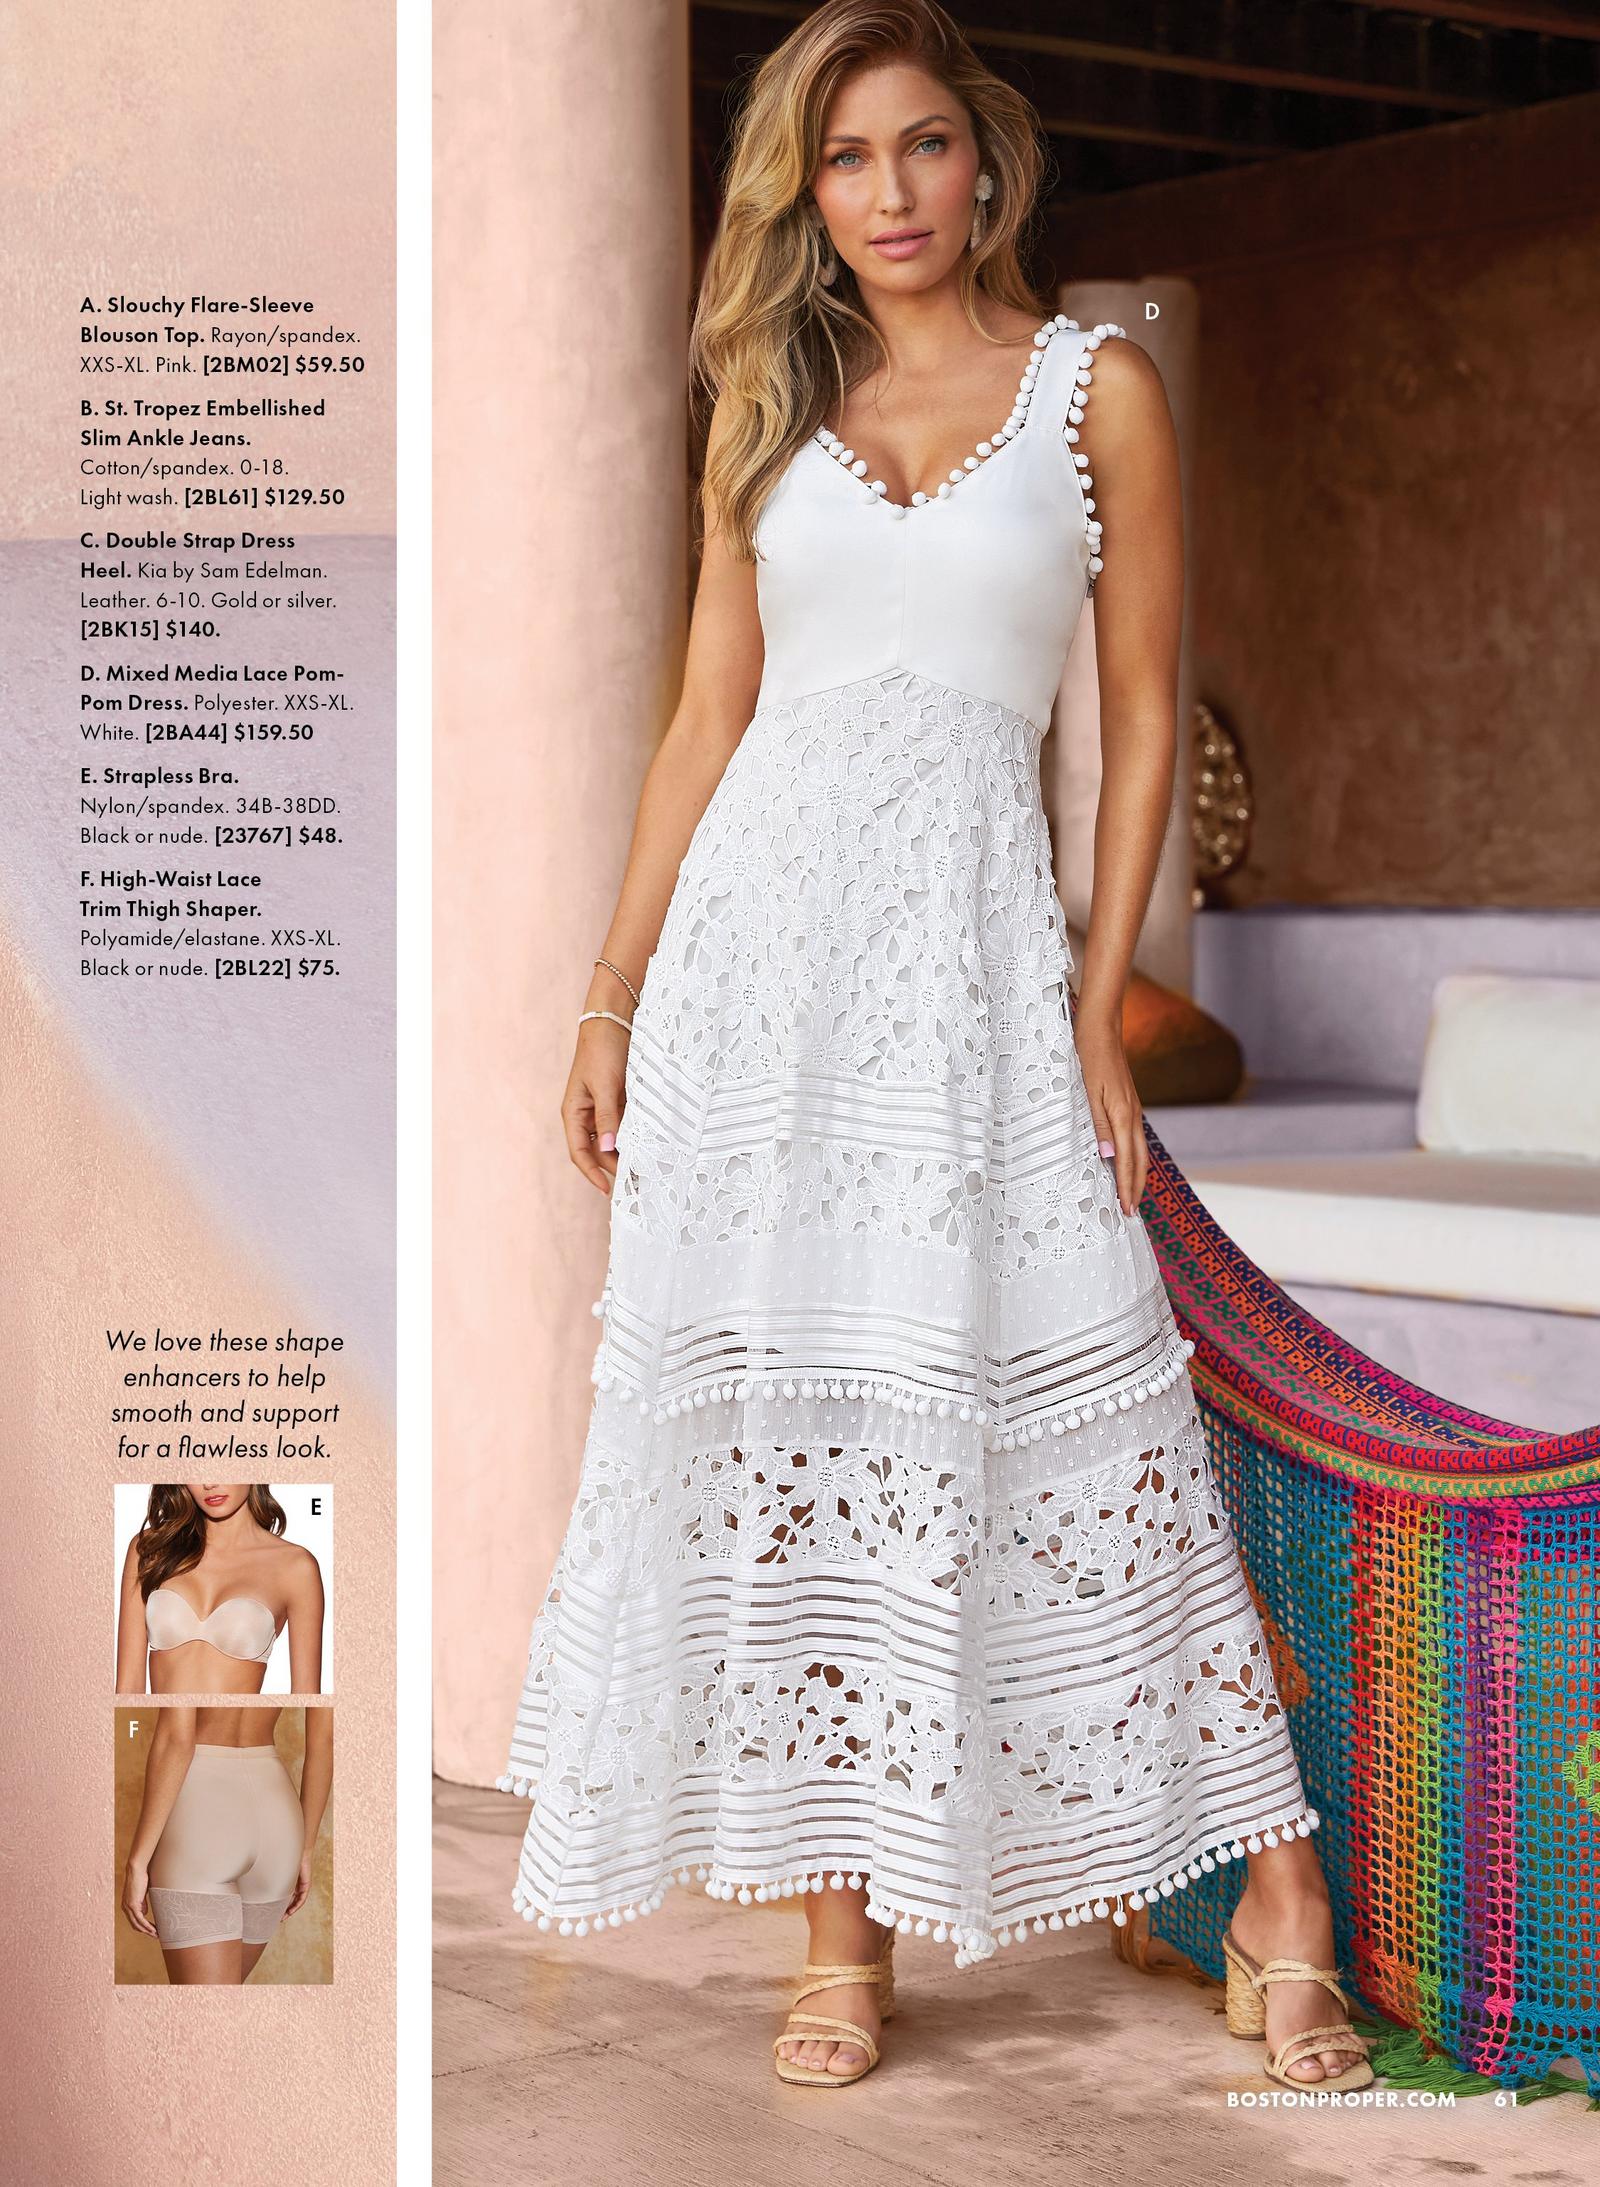 model wearing a white sleeveless lace and pom-pom maxi dress and raffia heels. nude strapless bra and nude lace-trim thigh shaper shown.